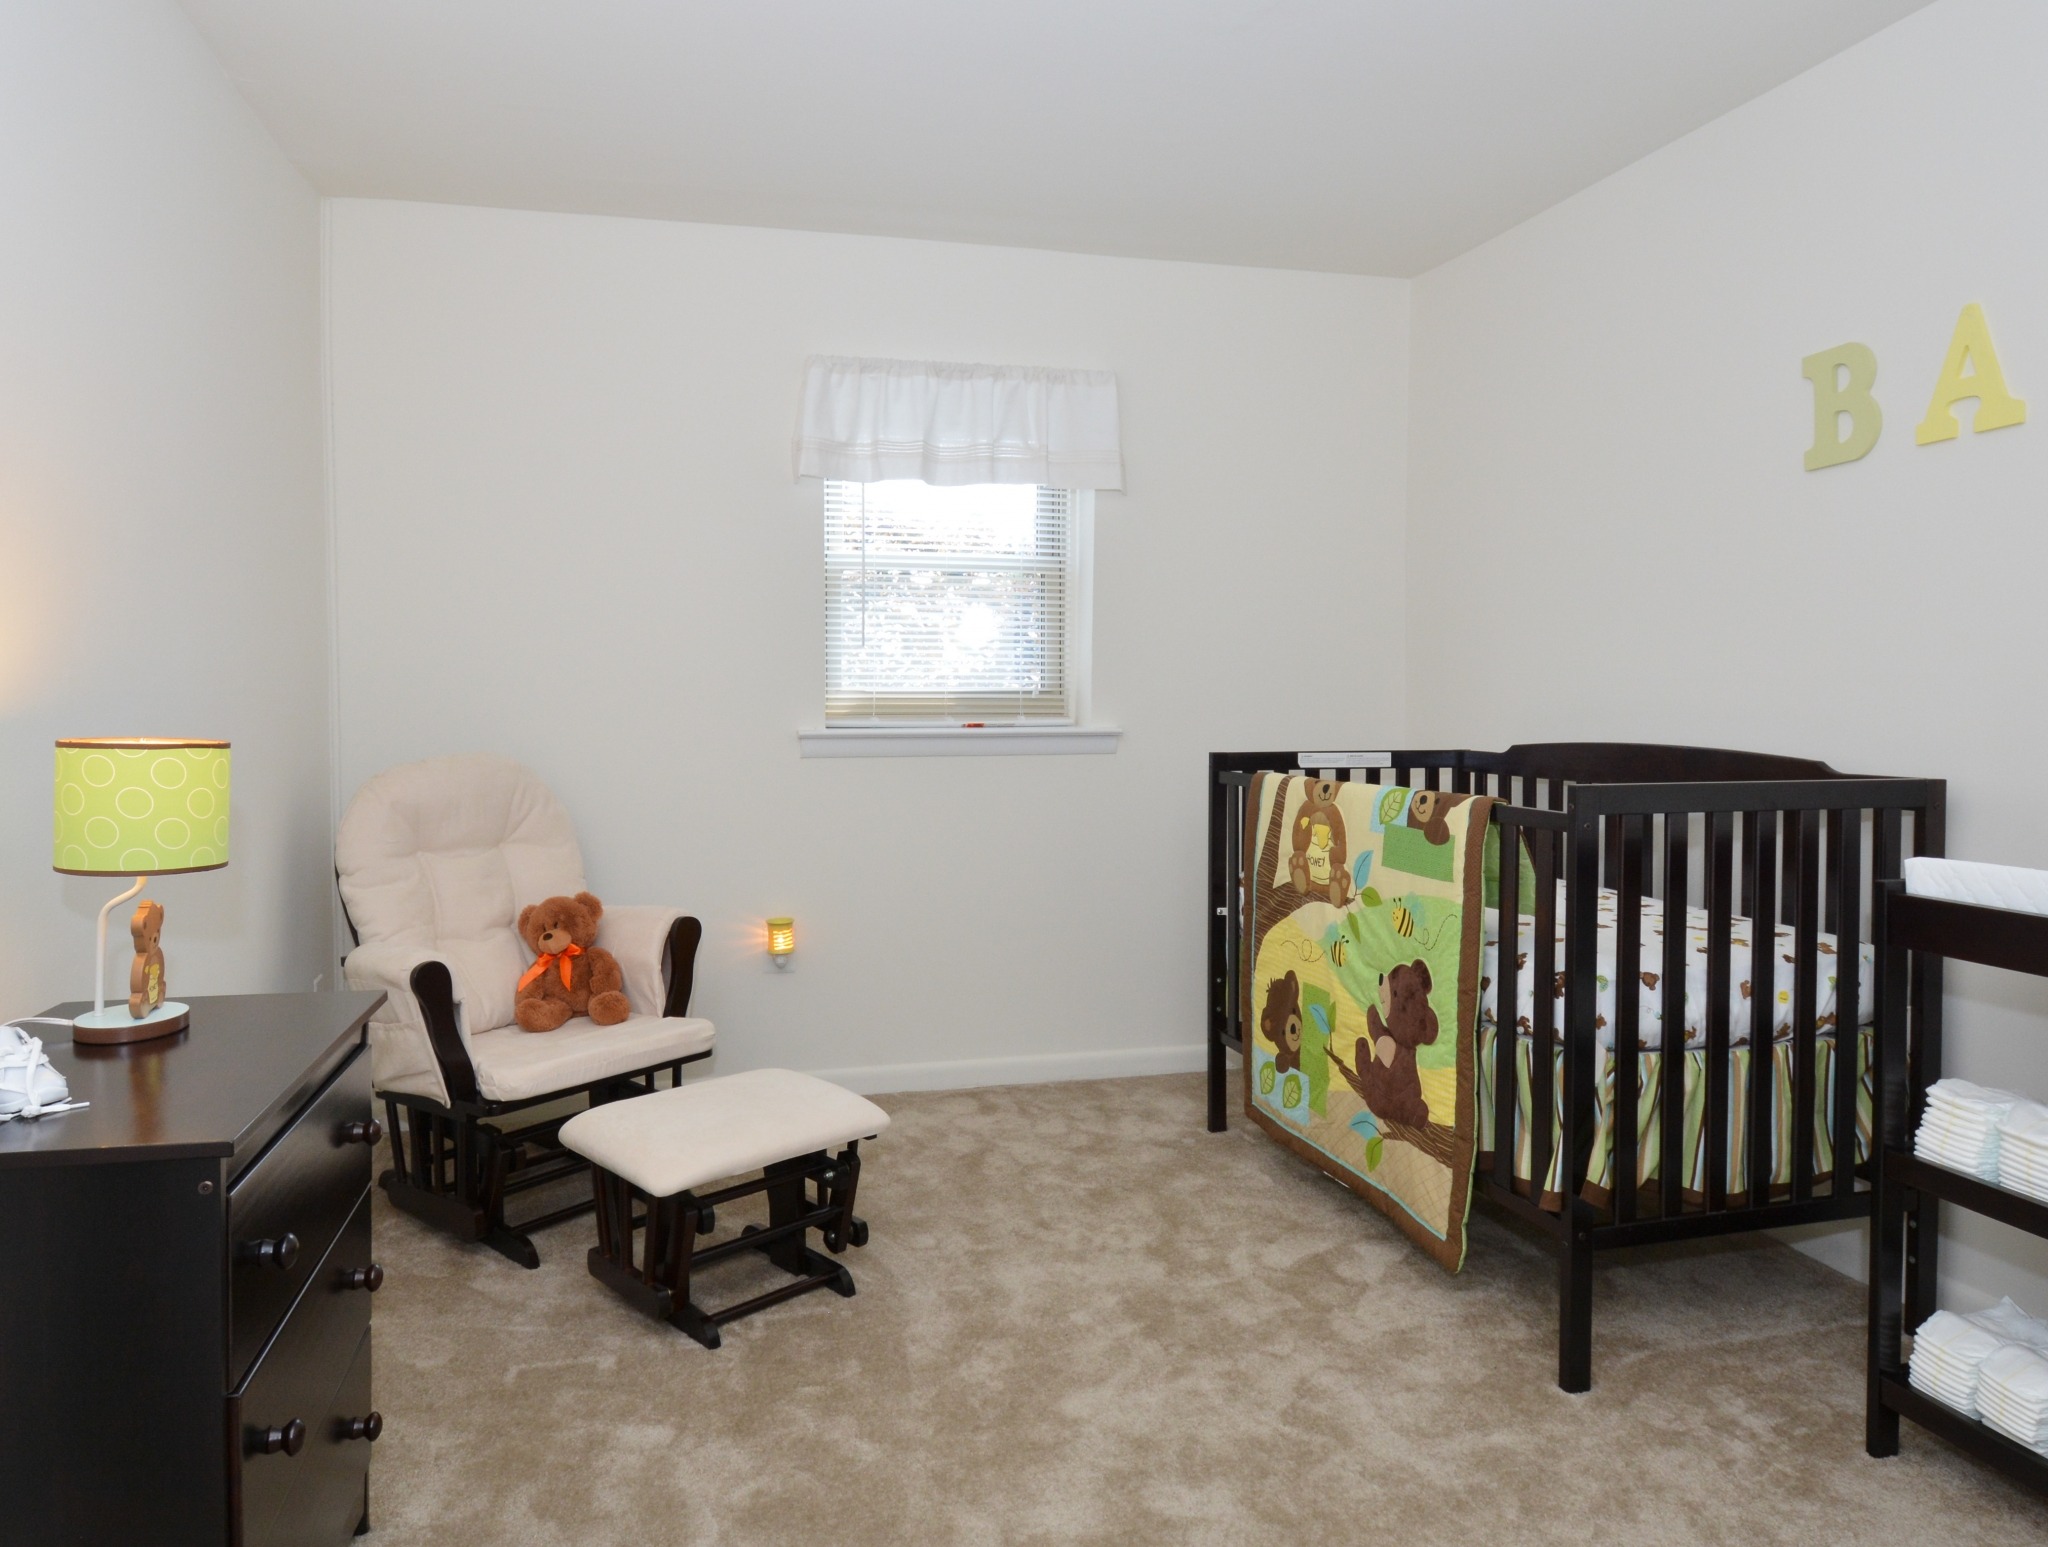 Carpeted bedroom with a crib, chair, and dresser.